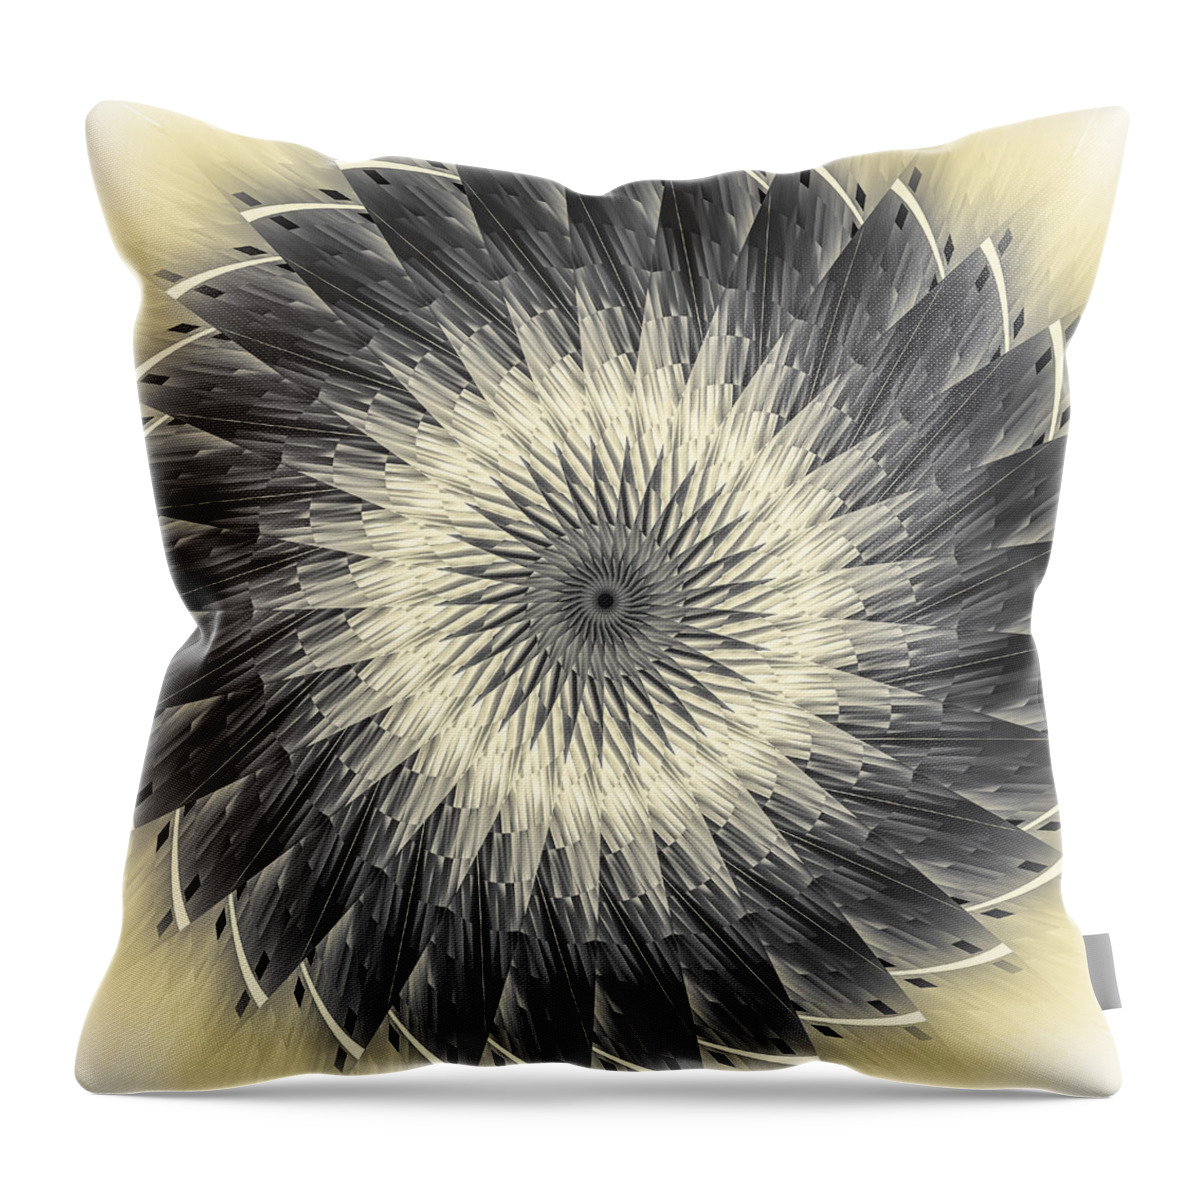 Abstract Throw Pillow featuring the digital art Slices of Sepia by Carolyn Marshall